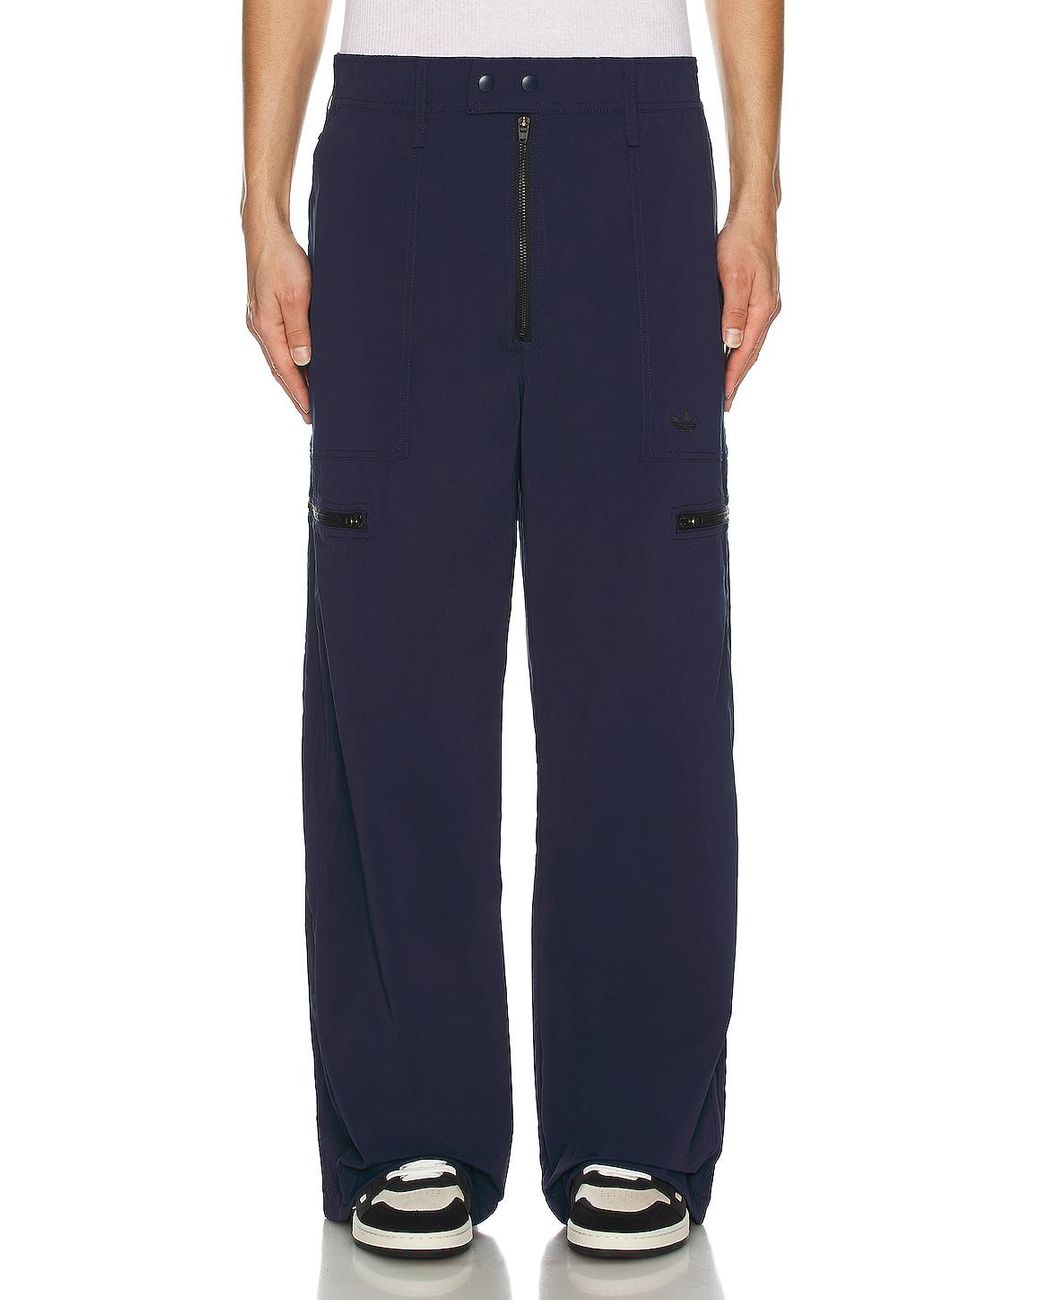 Adidas by Wales Bonner Cargo Pants in Blue for Men